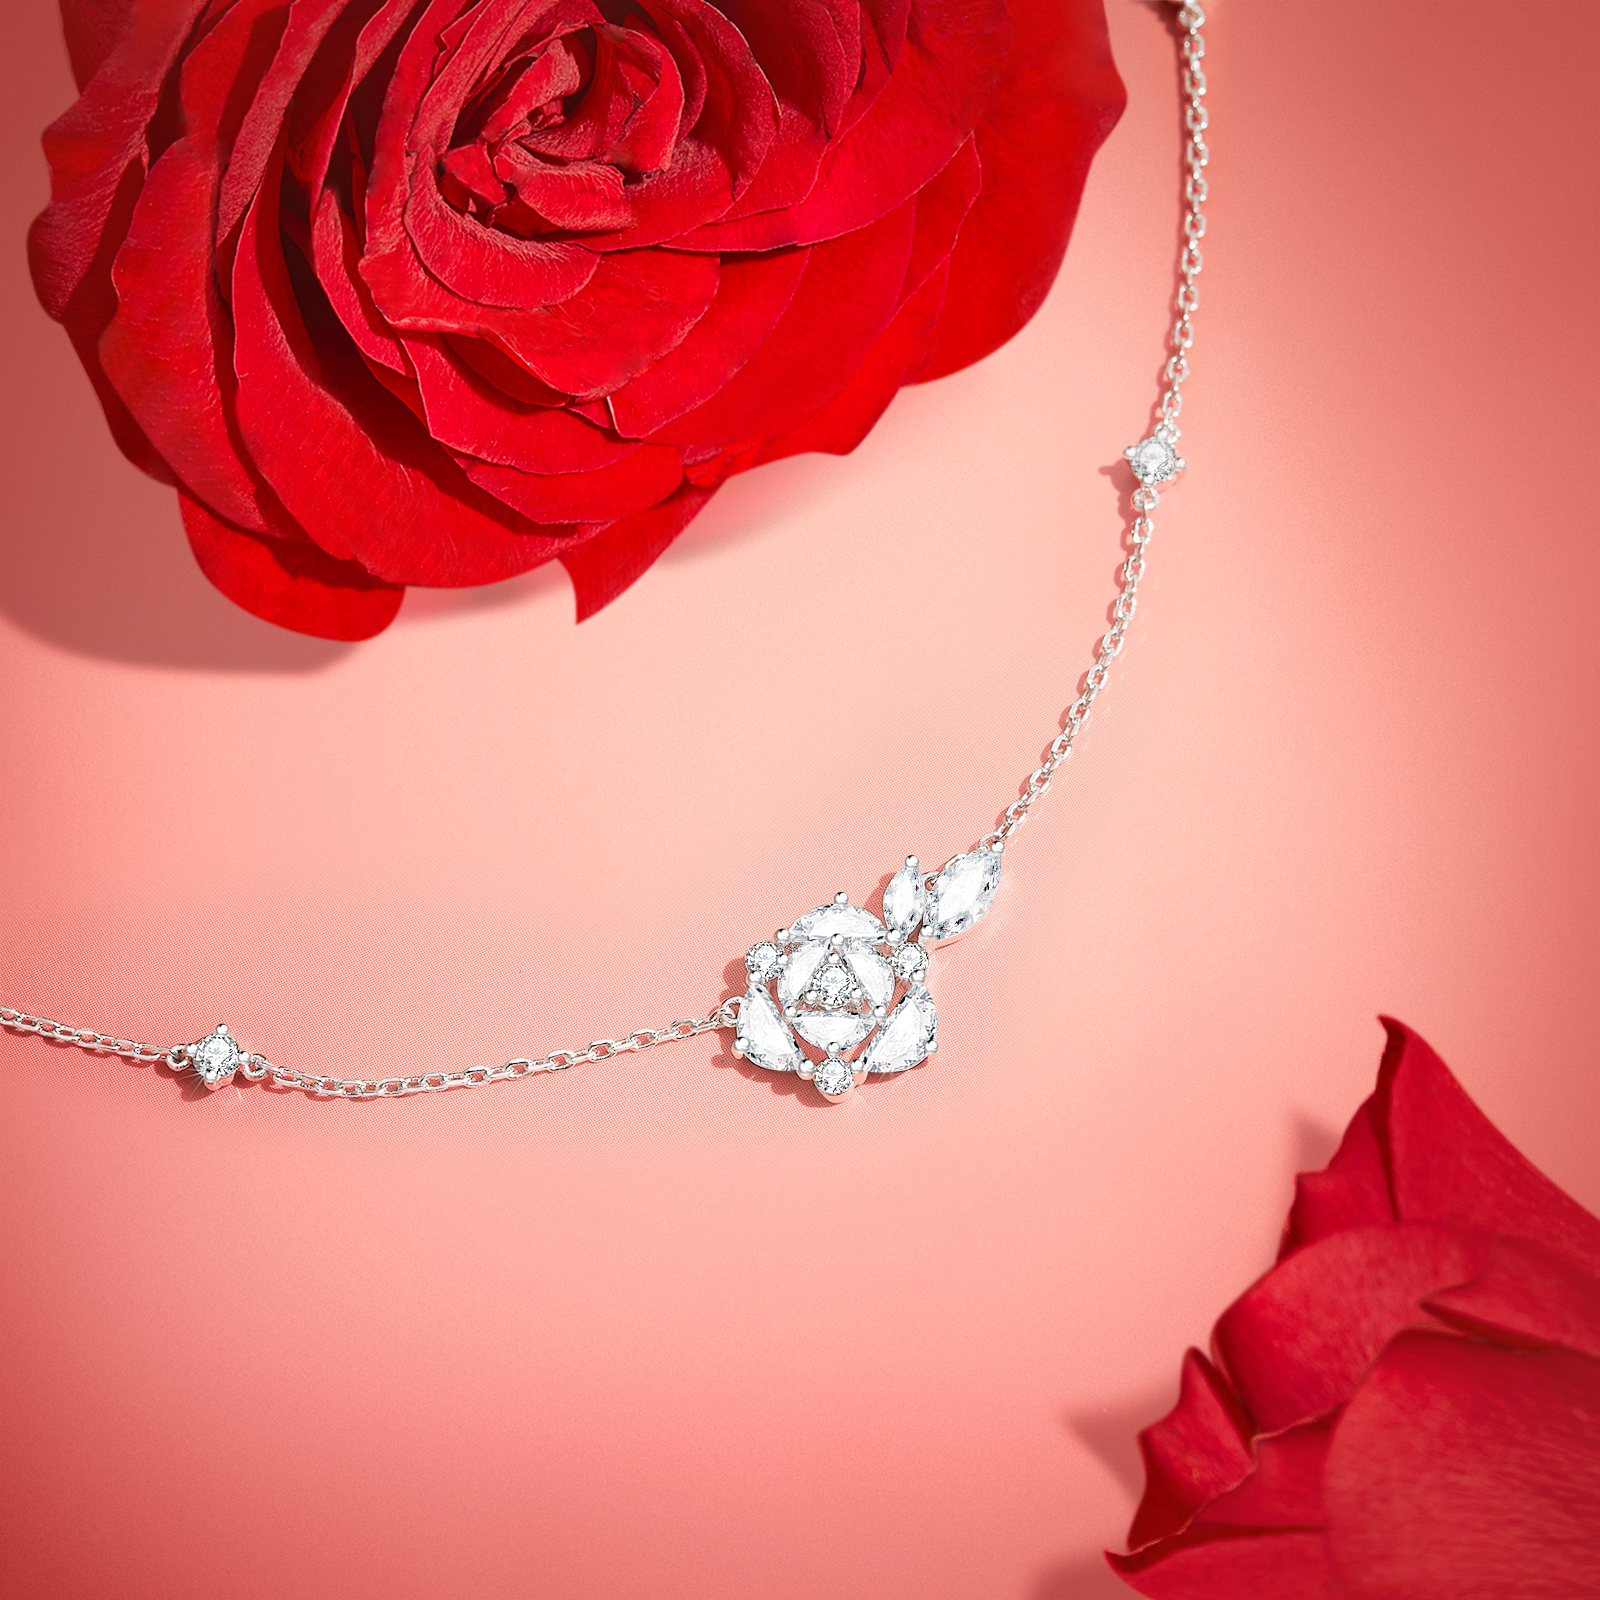 FANCI ME "One Rose" Sterling Silver Necklace Show